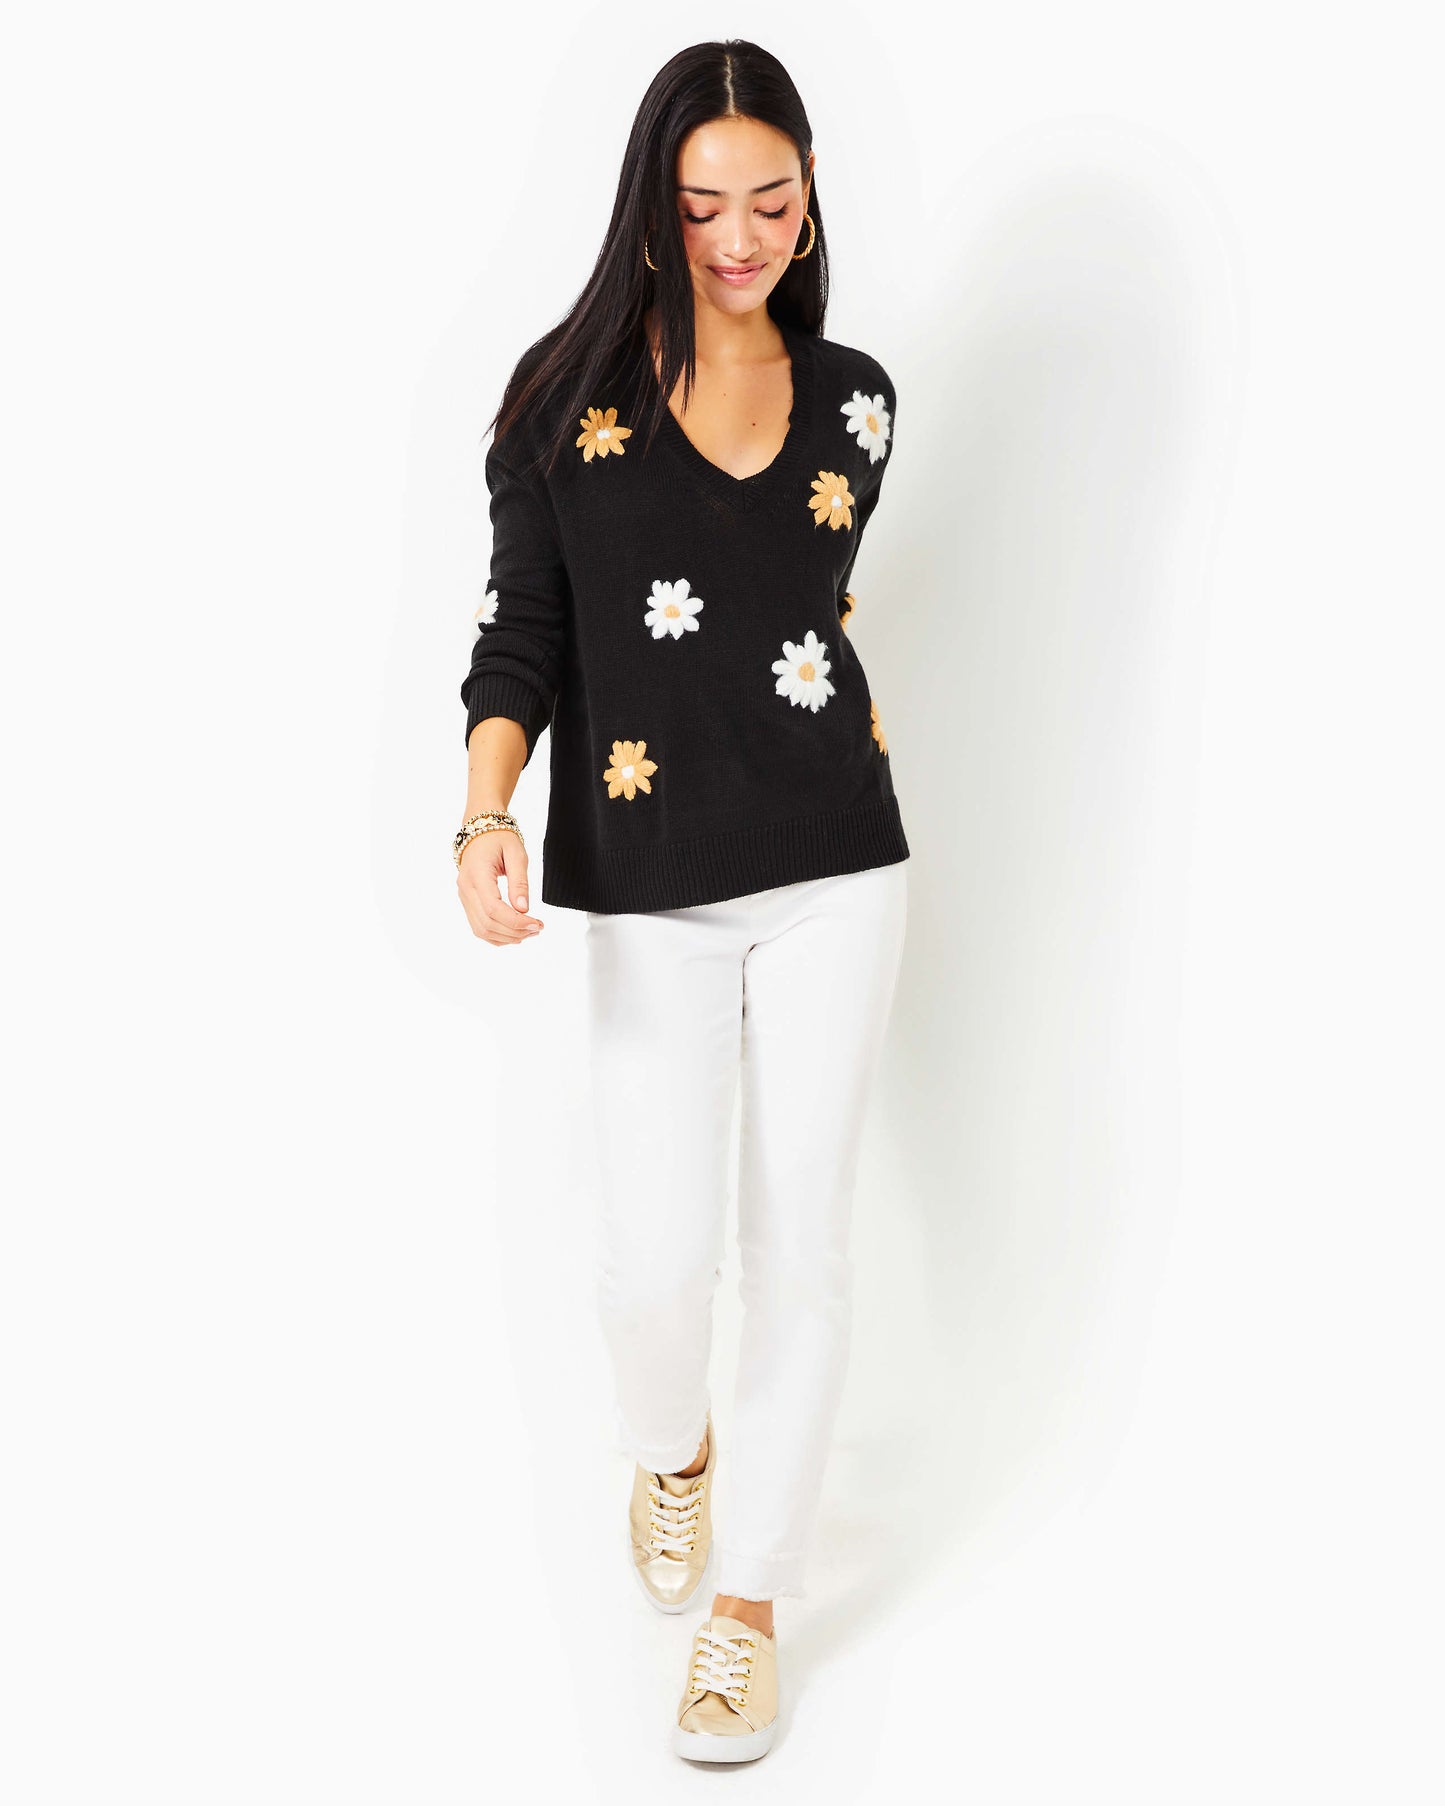 TENSLEY SWEATER, BLACK BLOOMING EMBROIDERY